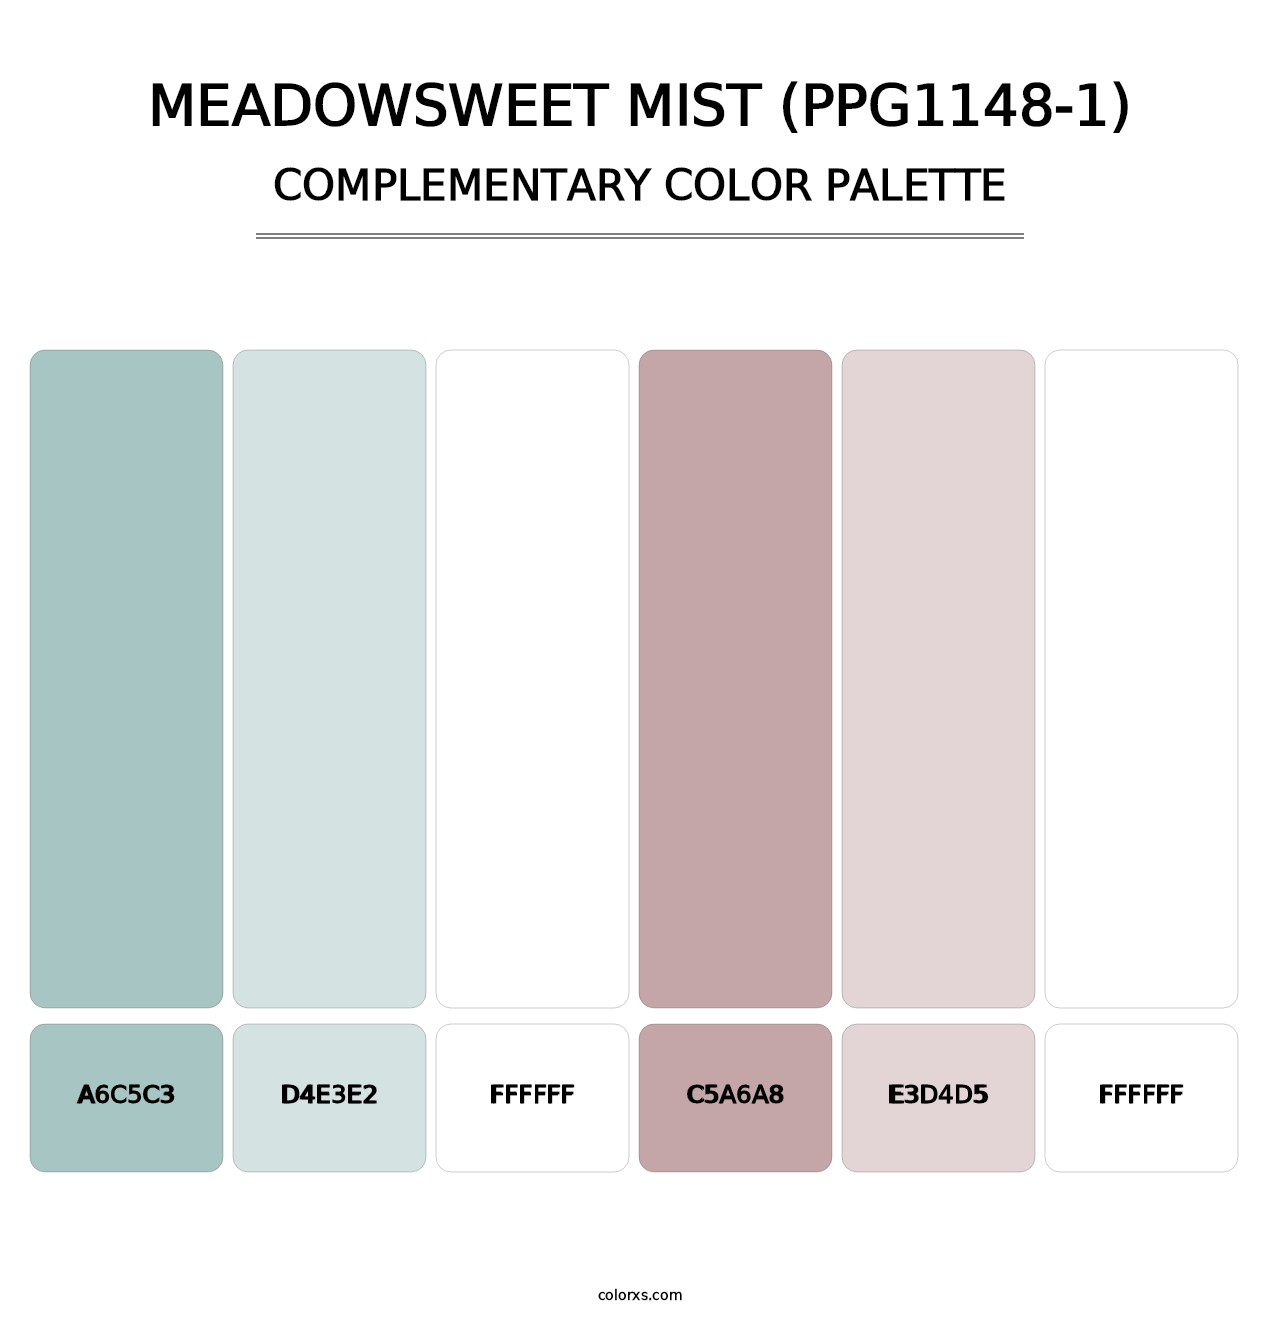 Meadowsweet Mist (PPG1148-1) - Complementary Color Palette